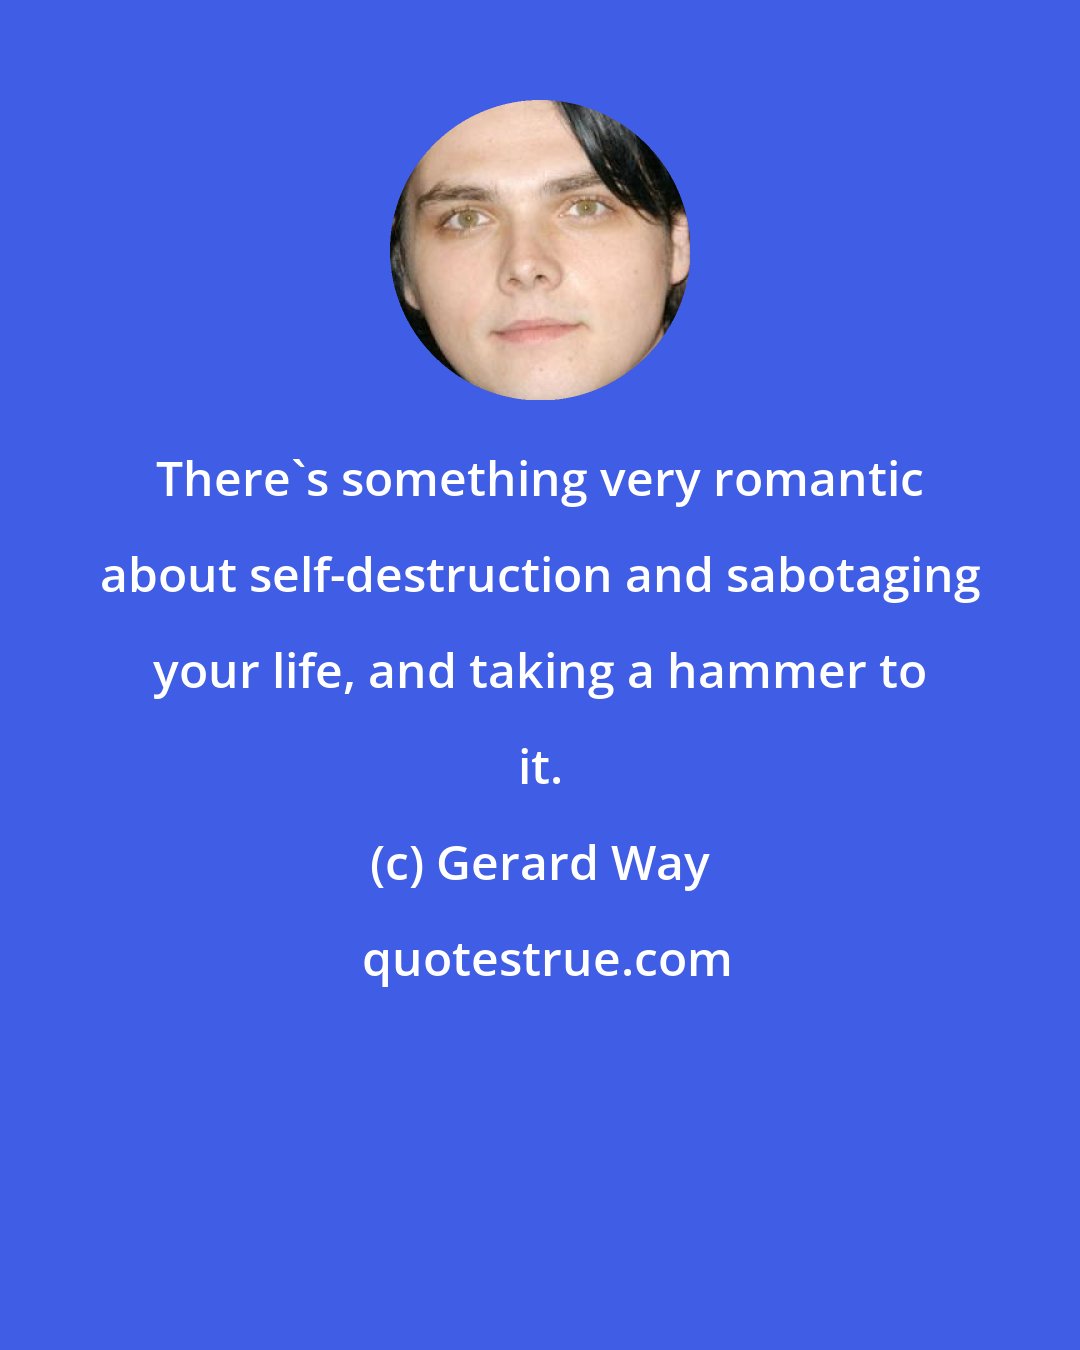 Gerard Way: There's something very romantic about self-destruction and sabotaging your life, and taking a hammer to it.